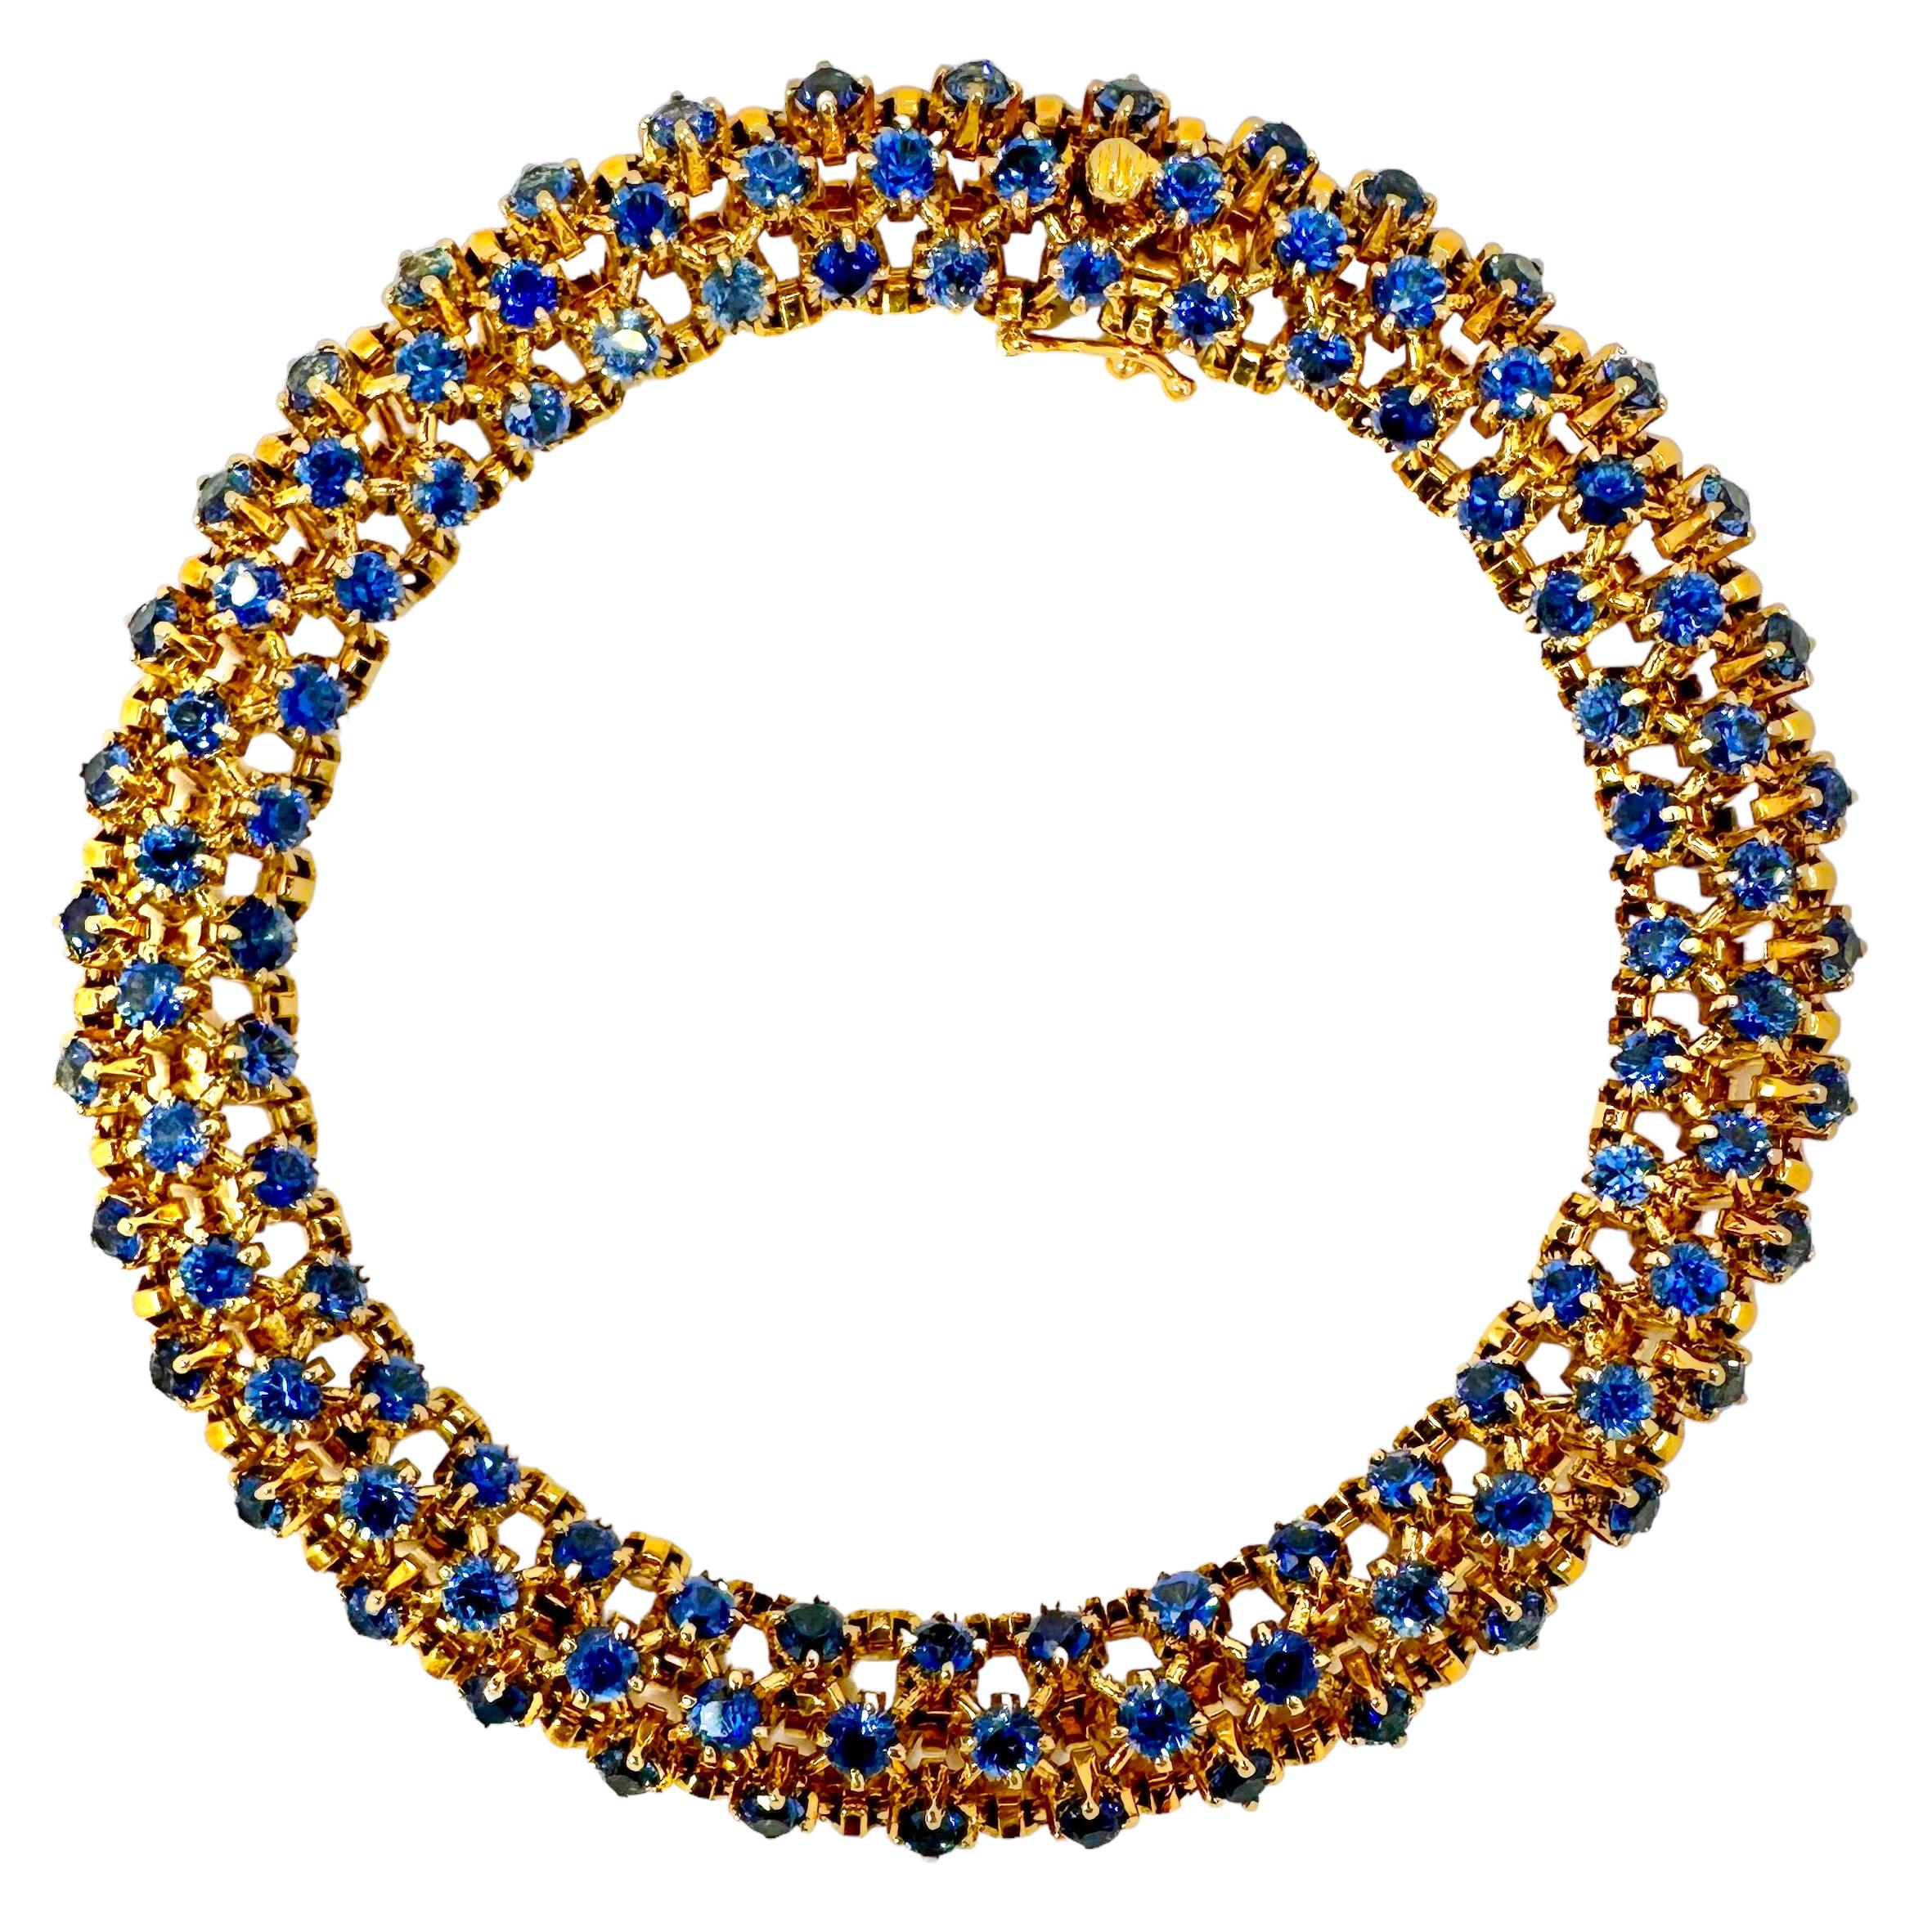 Exquisite Mid-20th Century French 18k Gold and Sapphire Bracelet